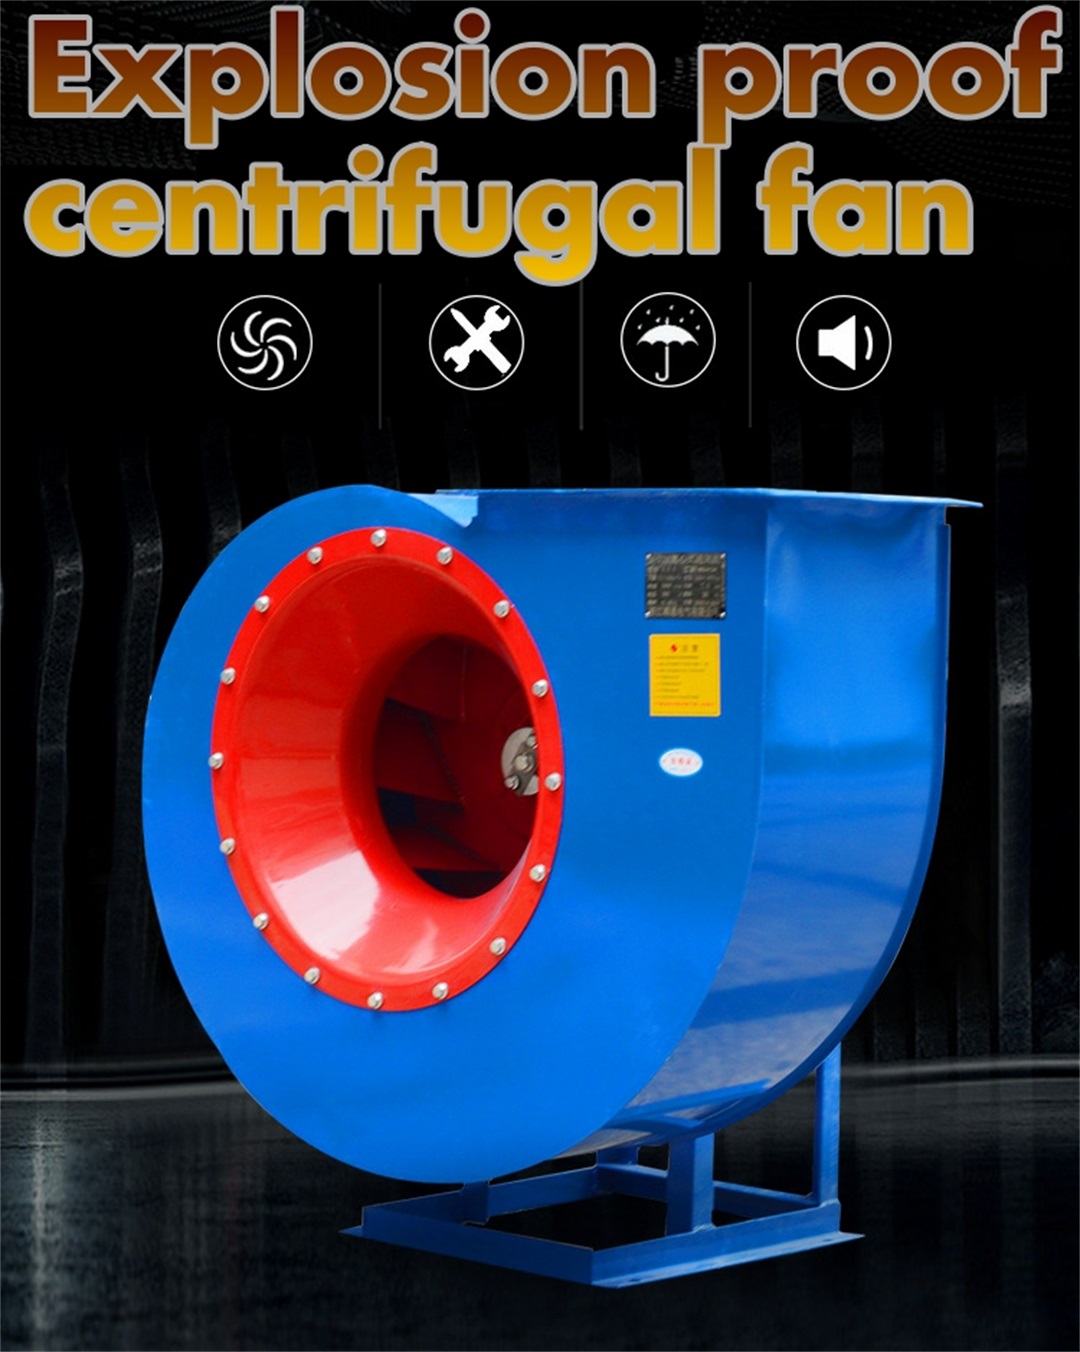 Explosion proof centrifugal fan